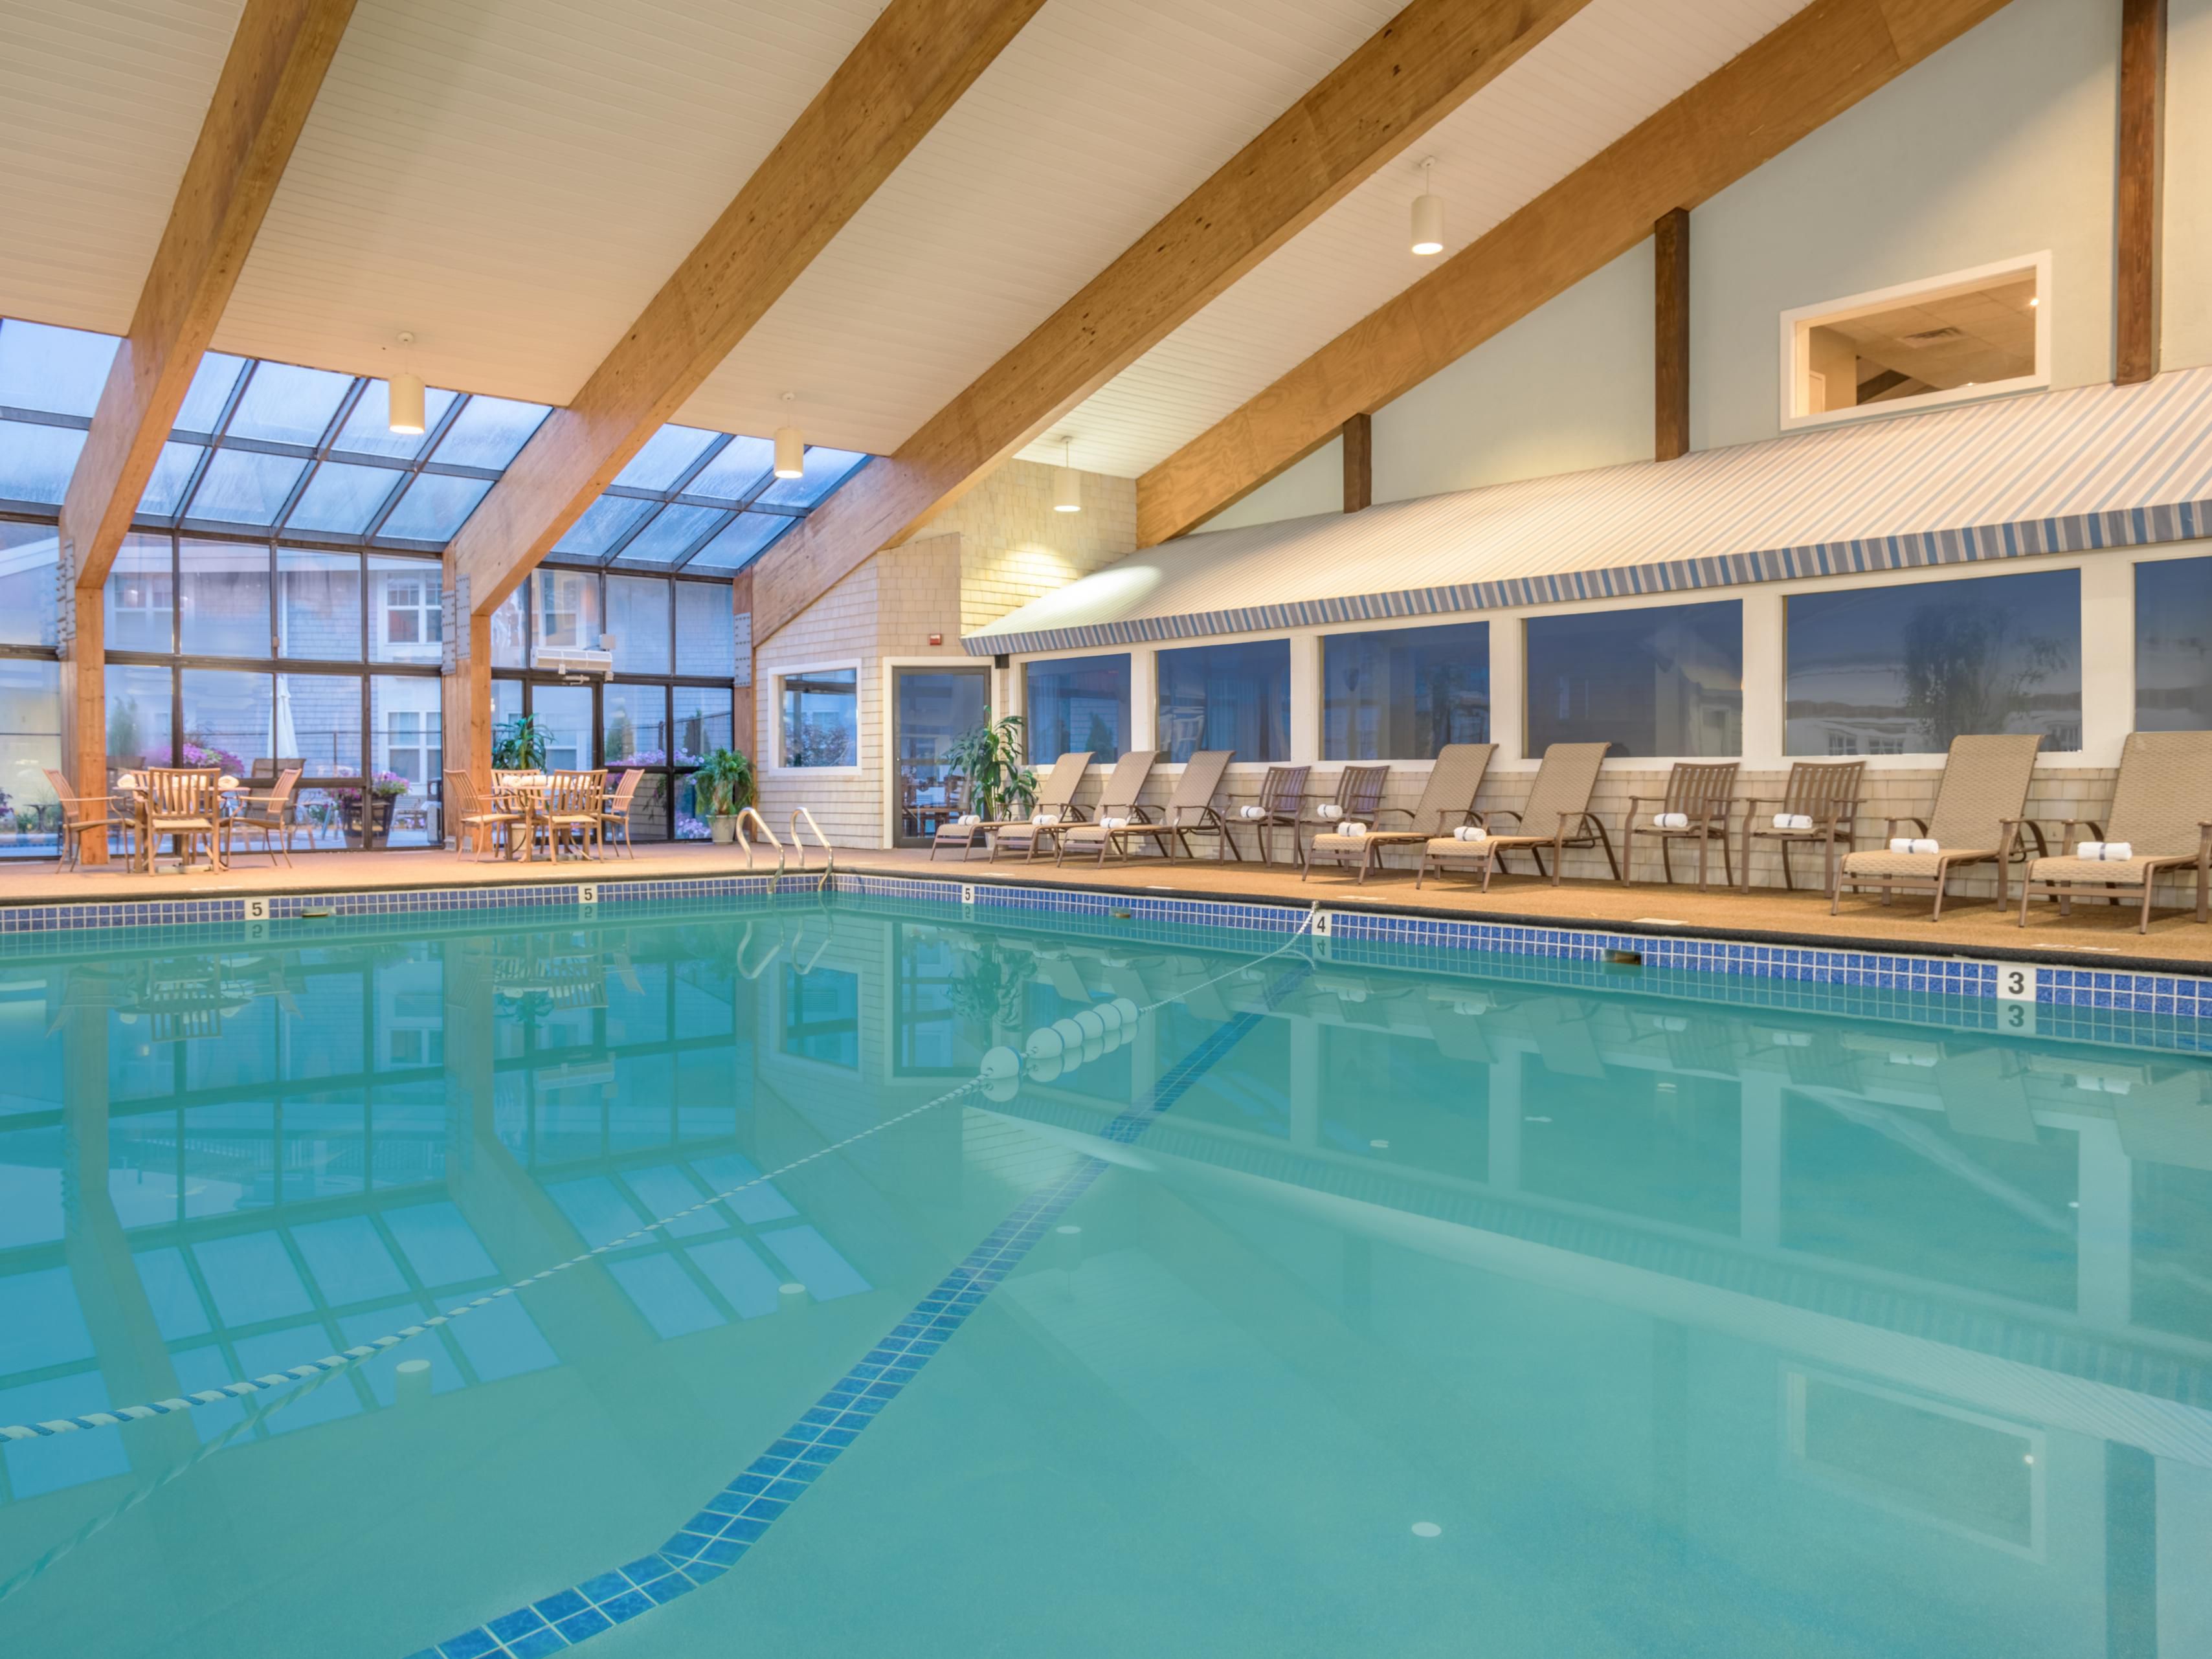 Enjoy our beautiful indoor heated pool. Seasonal hours in effect.  Please contact the hotel at 508-775-1153 for more information.